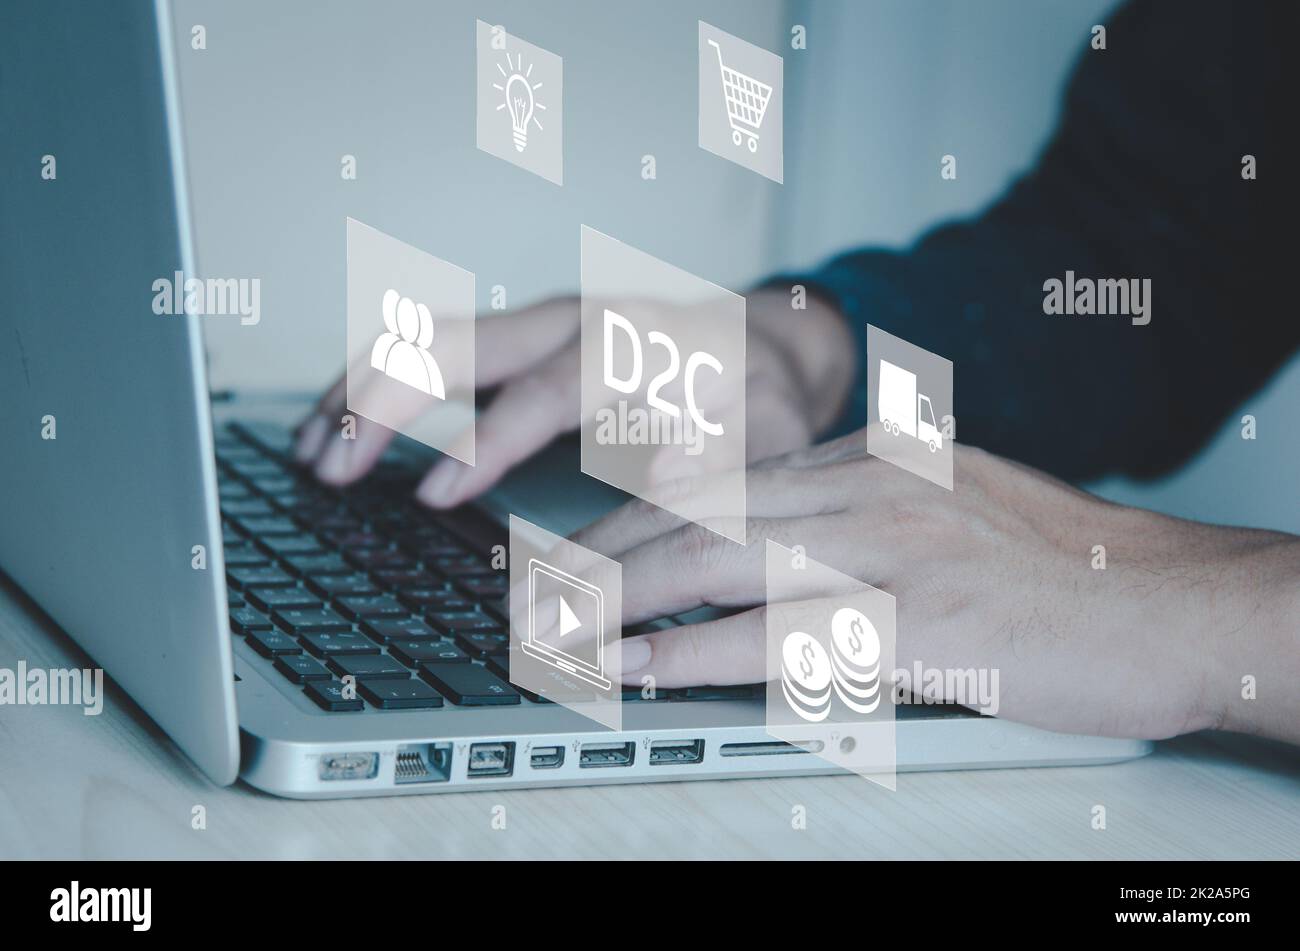 hand typing on computer laptop icon symbol Direct to Consumer D2C virtual screen Internet Business big data Technology Concept. Stock Photo